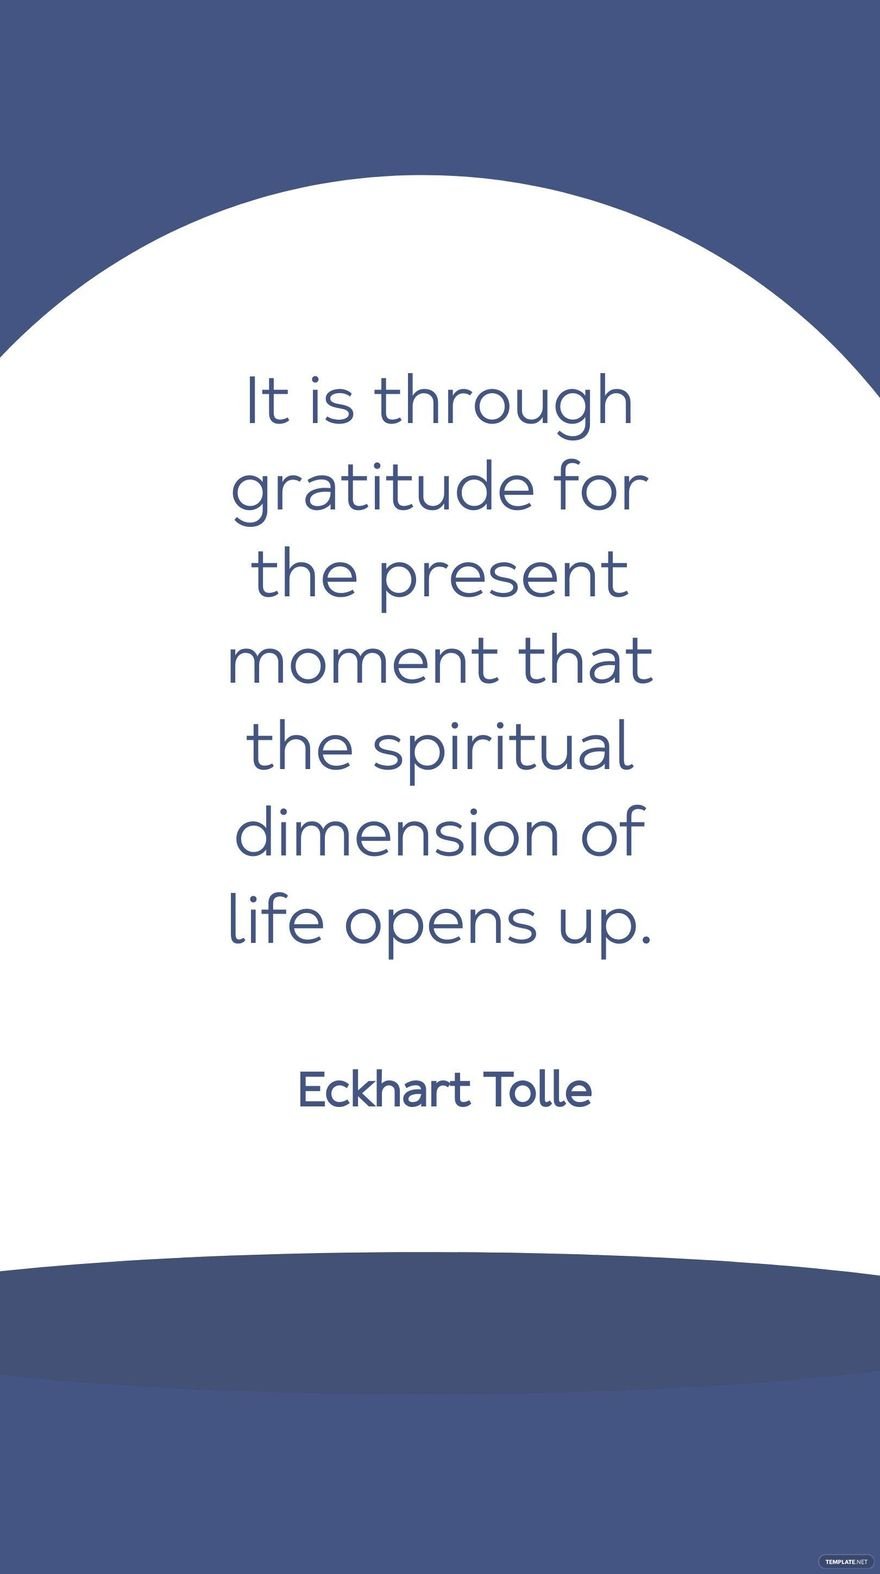 Eckhart Tolle -It is through gratitude for the present moment that the spiritual dimension of life opens up. in JPG